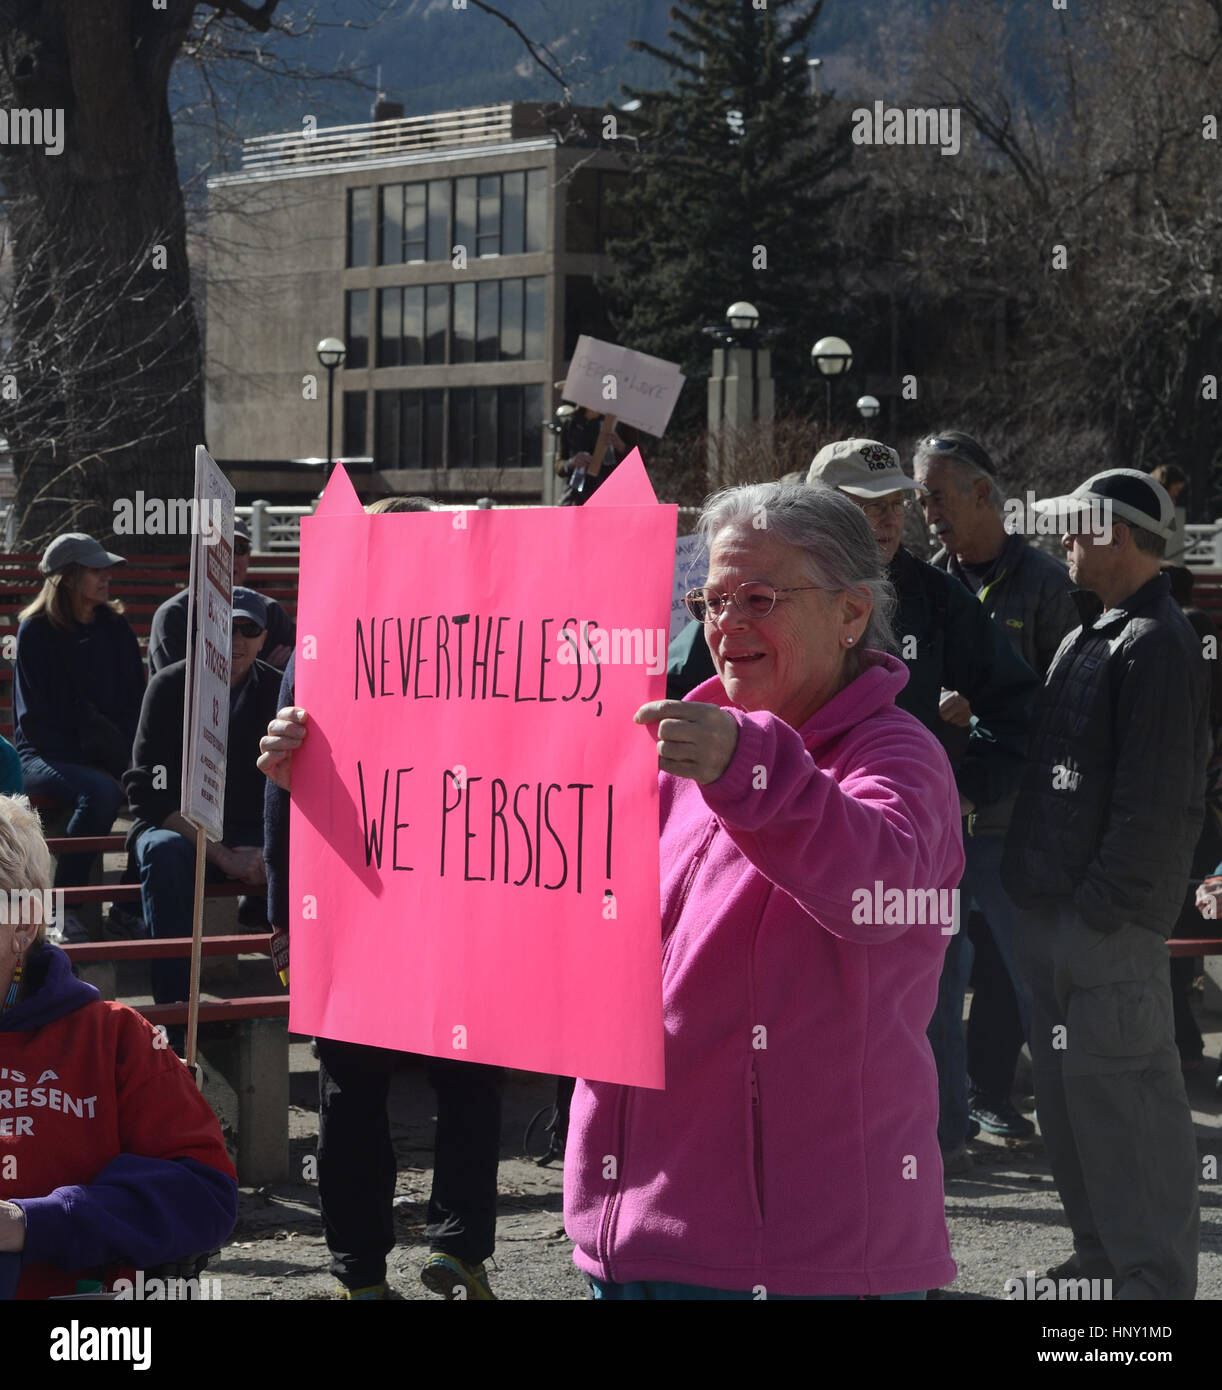 Protester holds 'Nevertheless we persist' sign in Boulder, Colorado Stock Photo